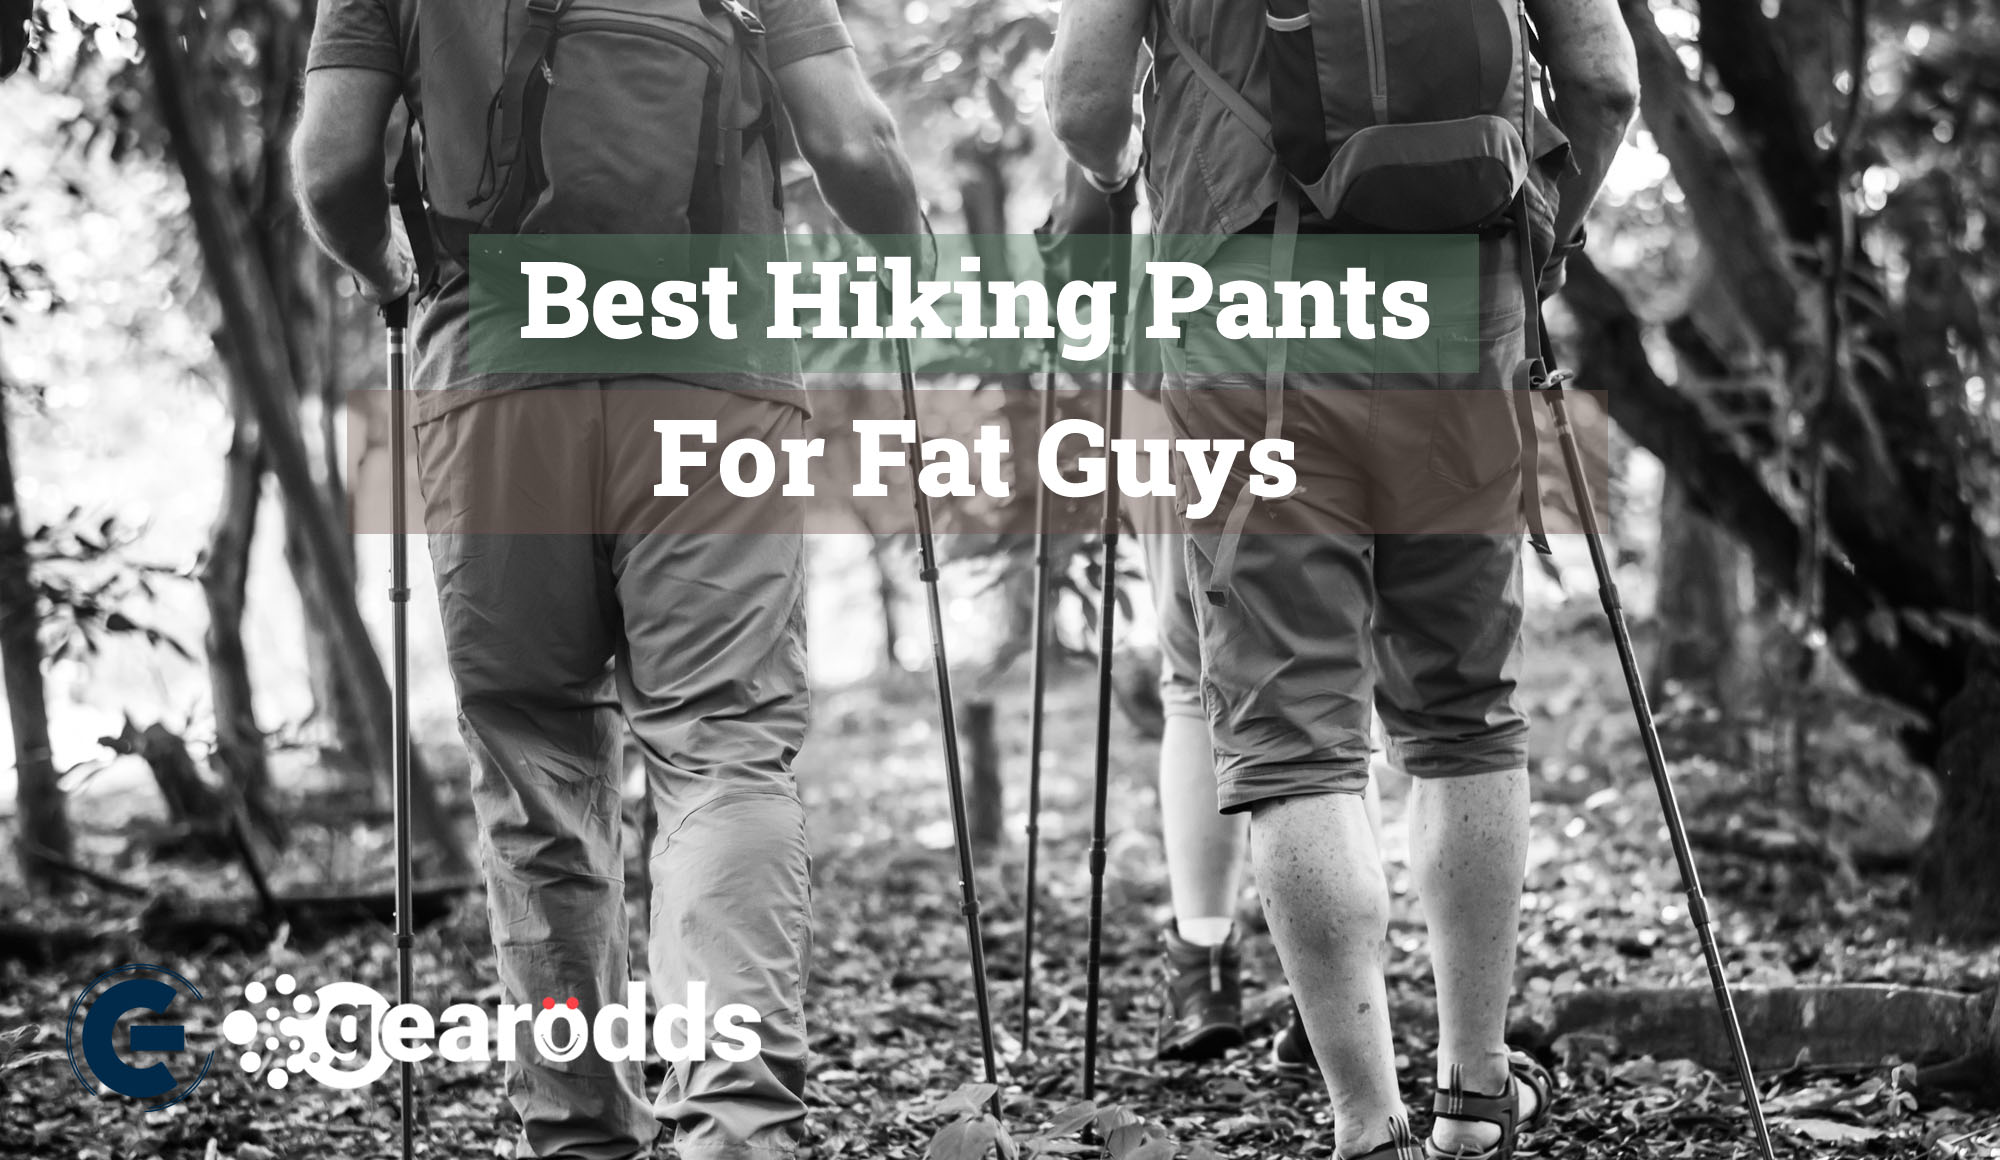 Best Hiking Pants for Fat Guys